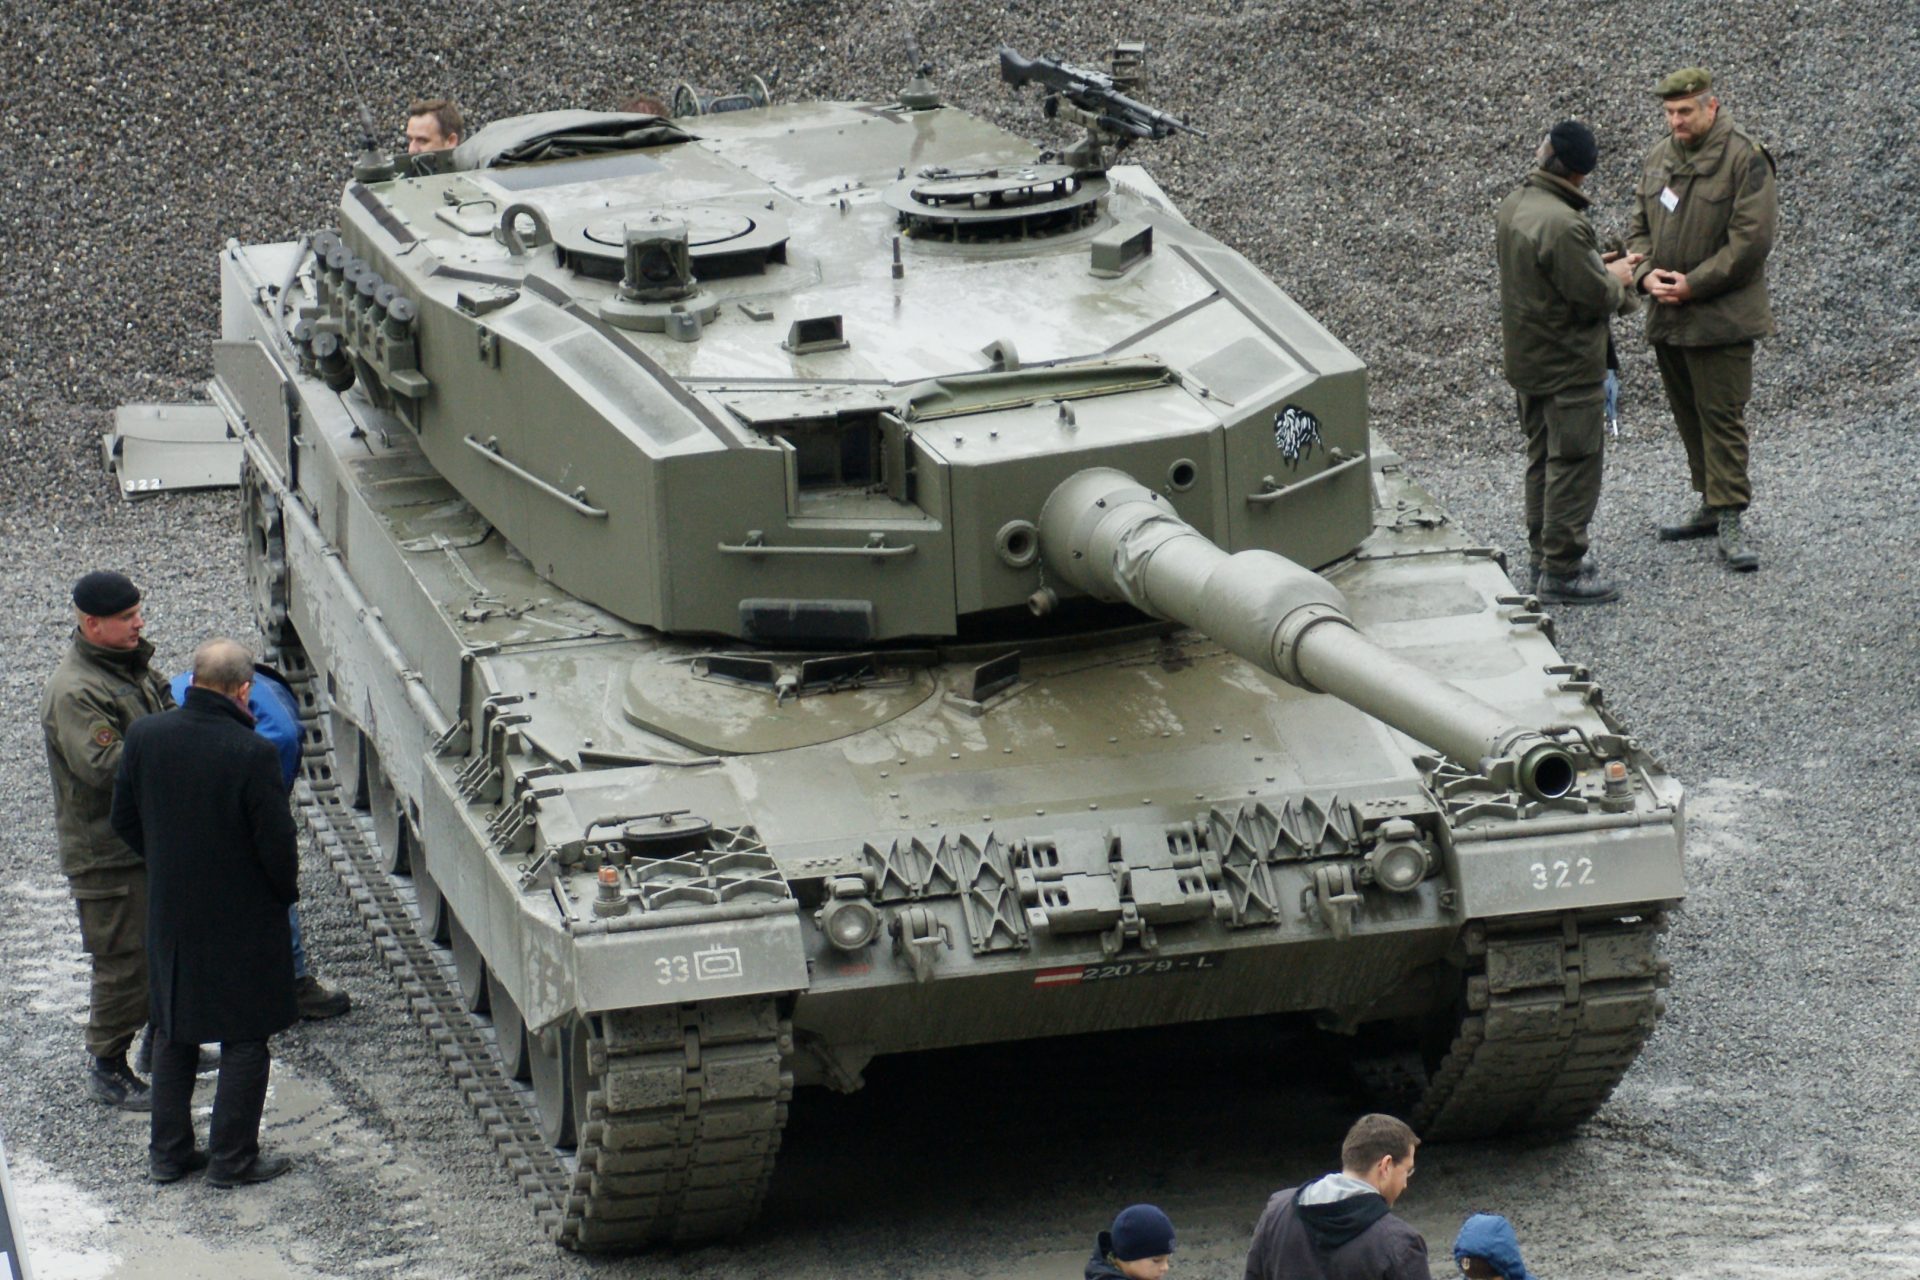 Additional Leopard 2A4s for Ukraine’s military